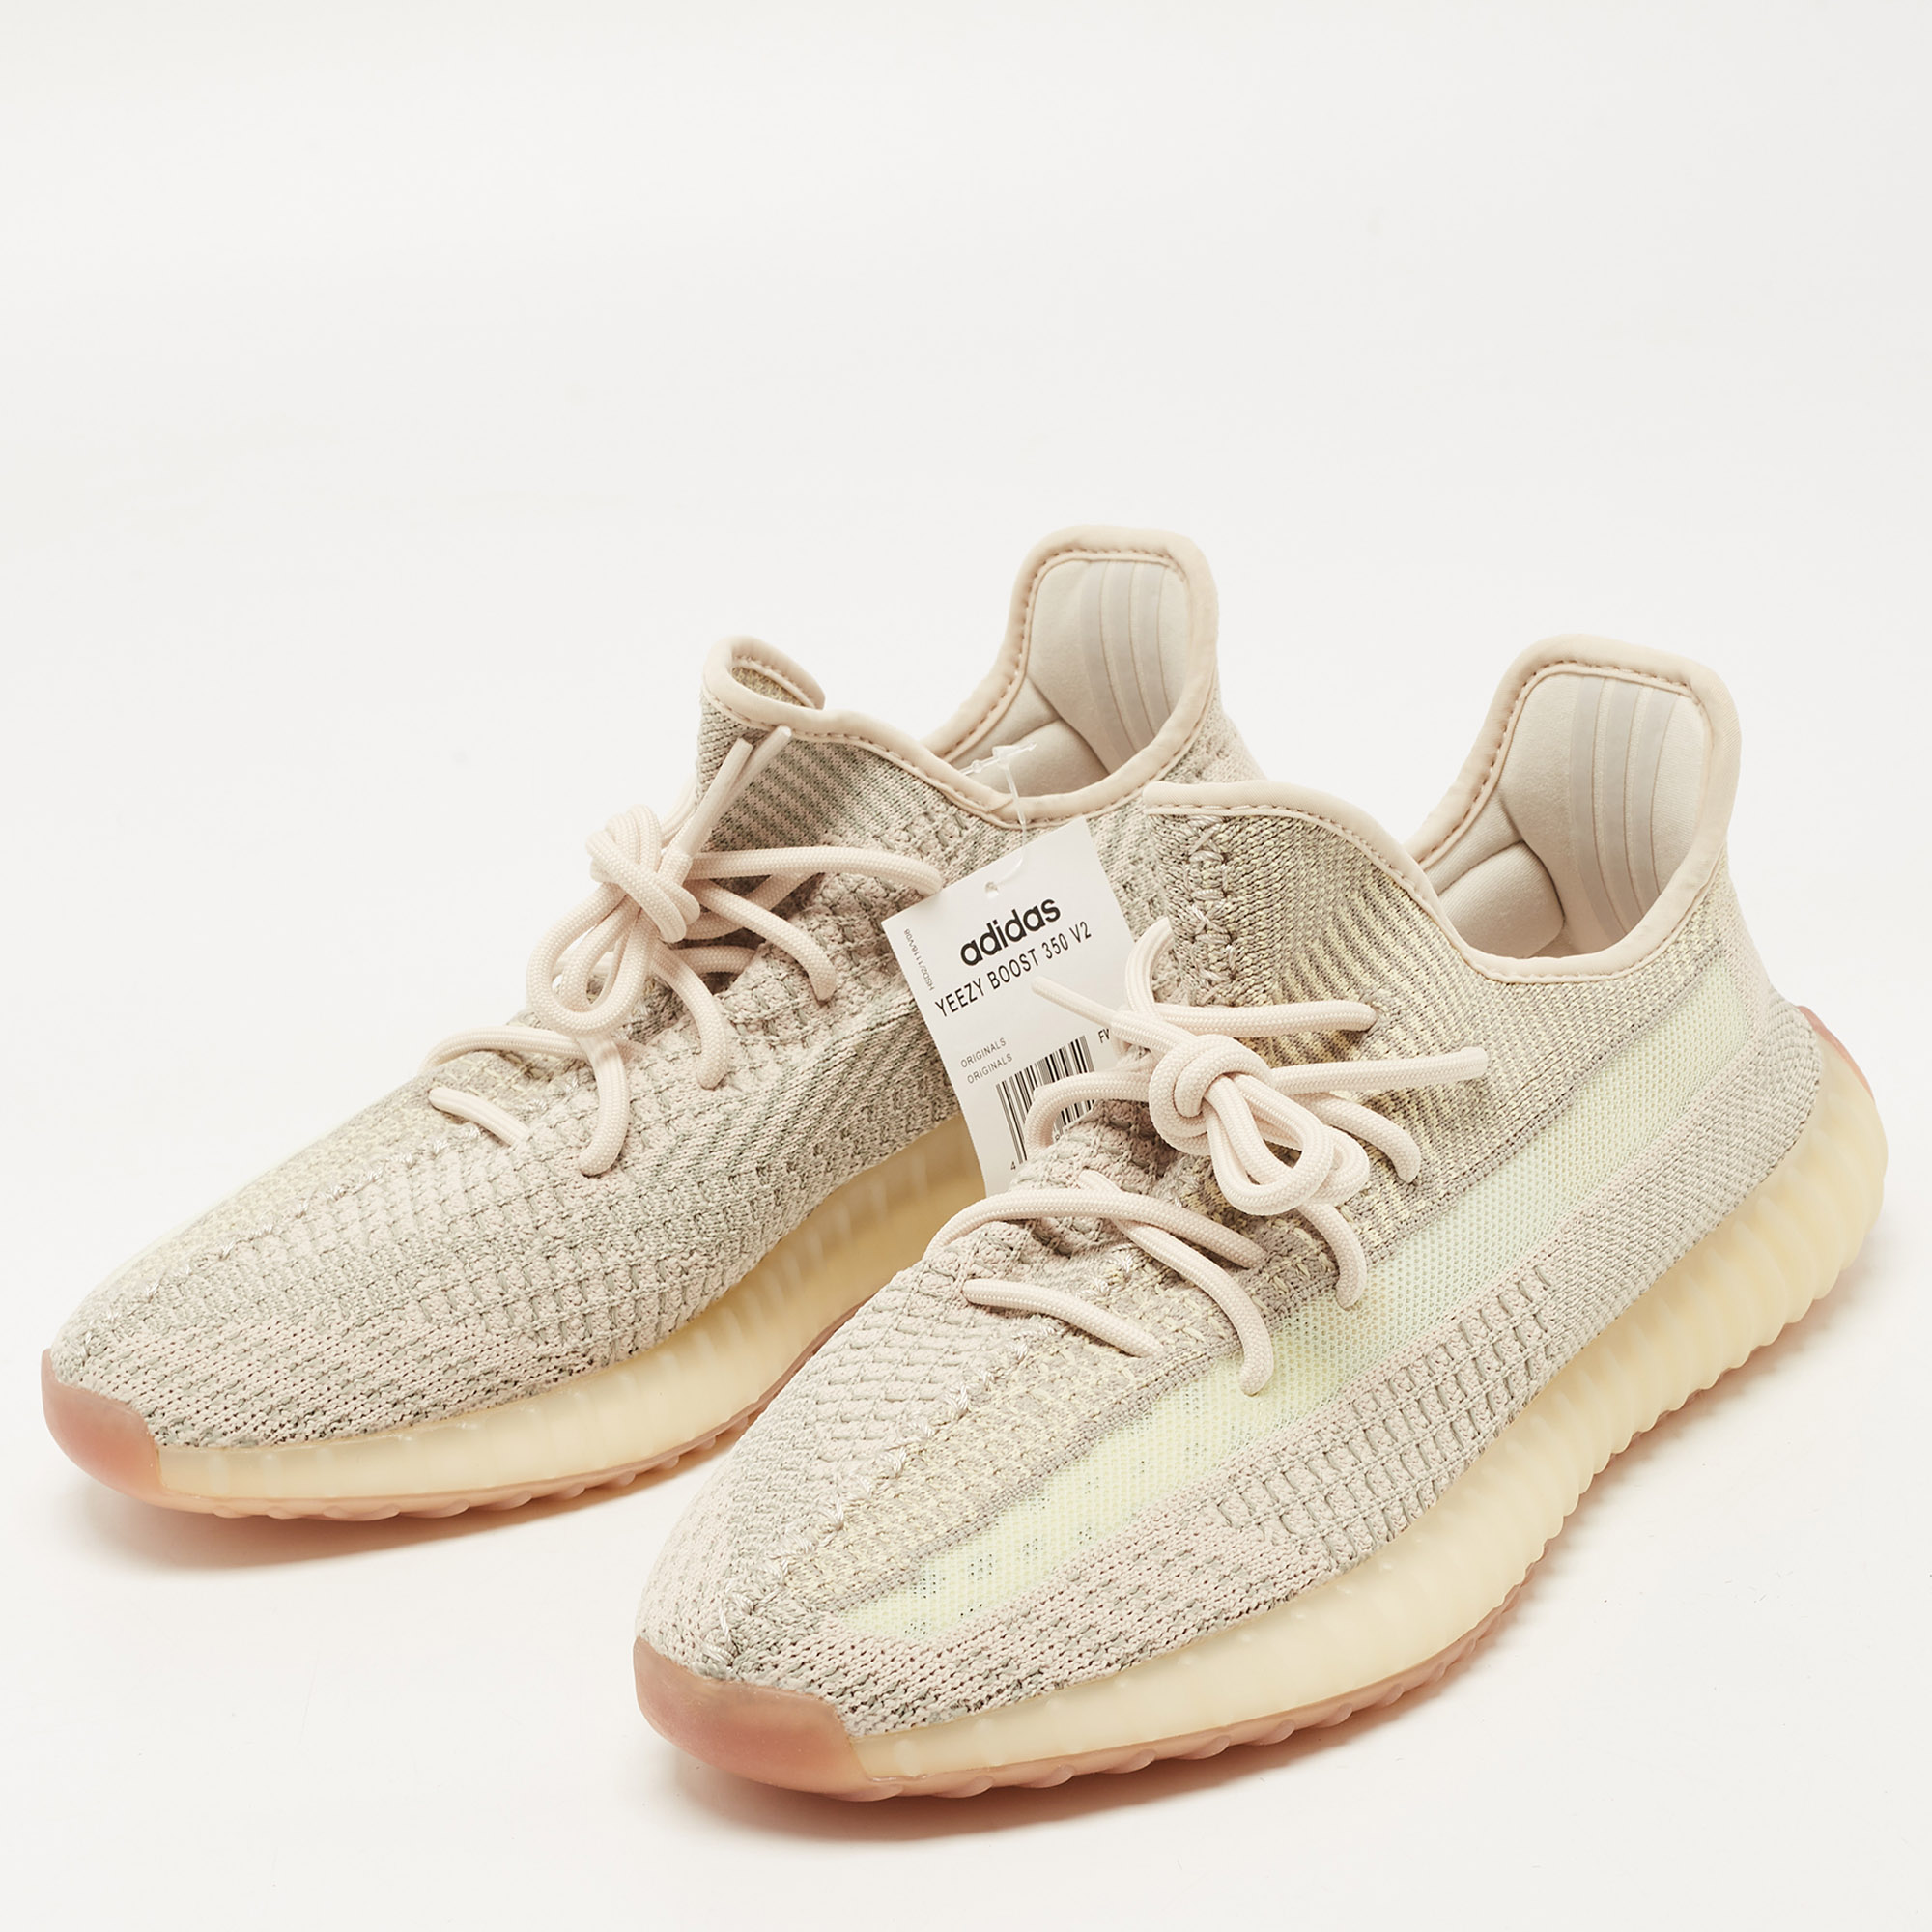 

Yeezy x Adidas Beige/Grey Knit Fabric Boost 350 V2 Citrin Sneakers Size 44 2/3